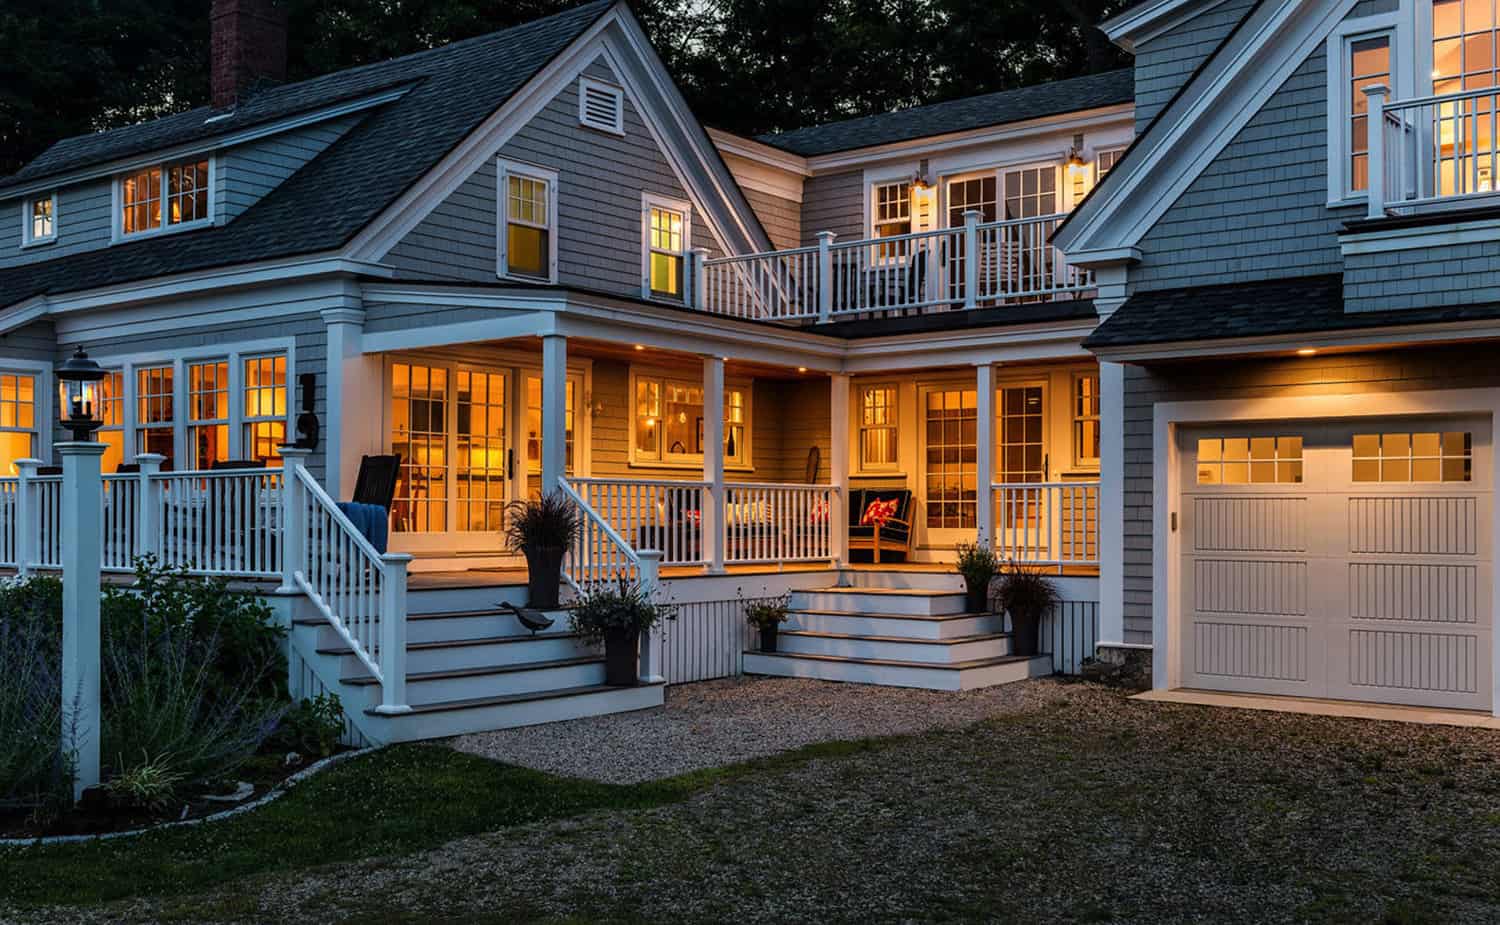 Take a peek inside this glorious Cape Cod style cottage in coastal Maine